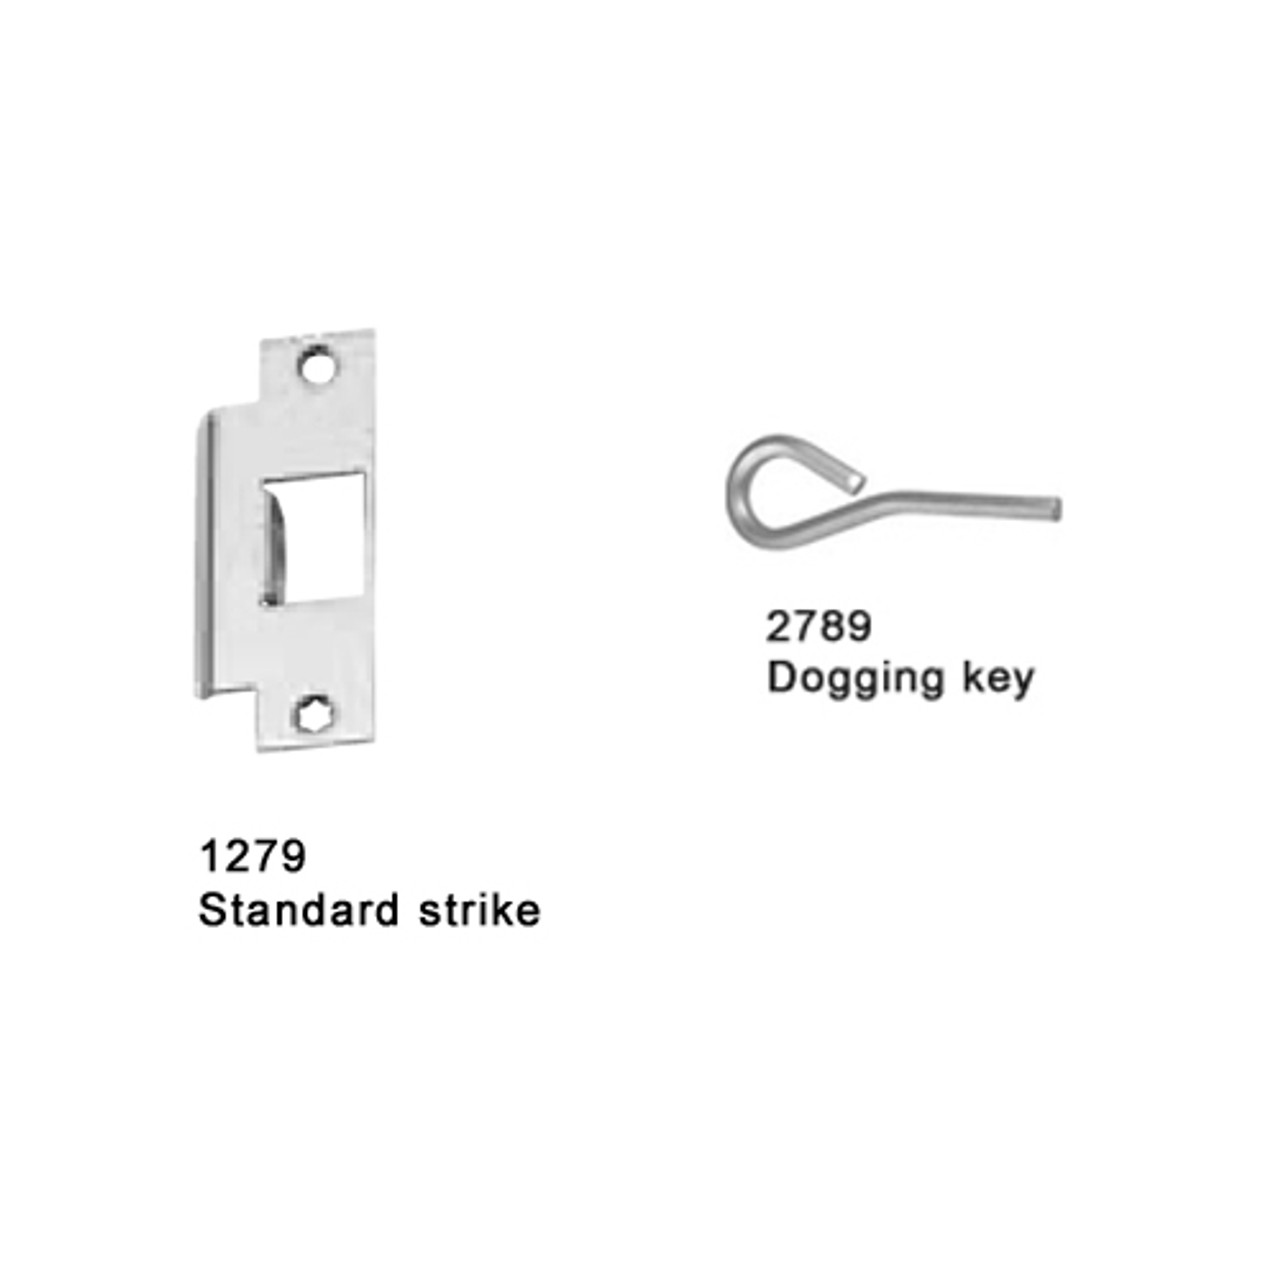 25-M-TP-BE-US26-3-LHR Falcon 25 Series Mortise Lock Devices 512TP-BE Thumbpiece Trim with Blank Escutcheon in Polished Chrome